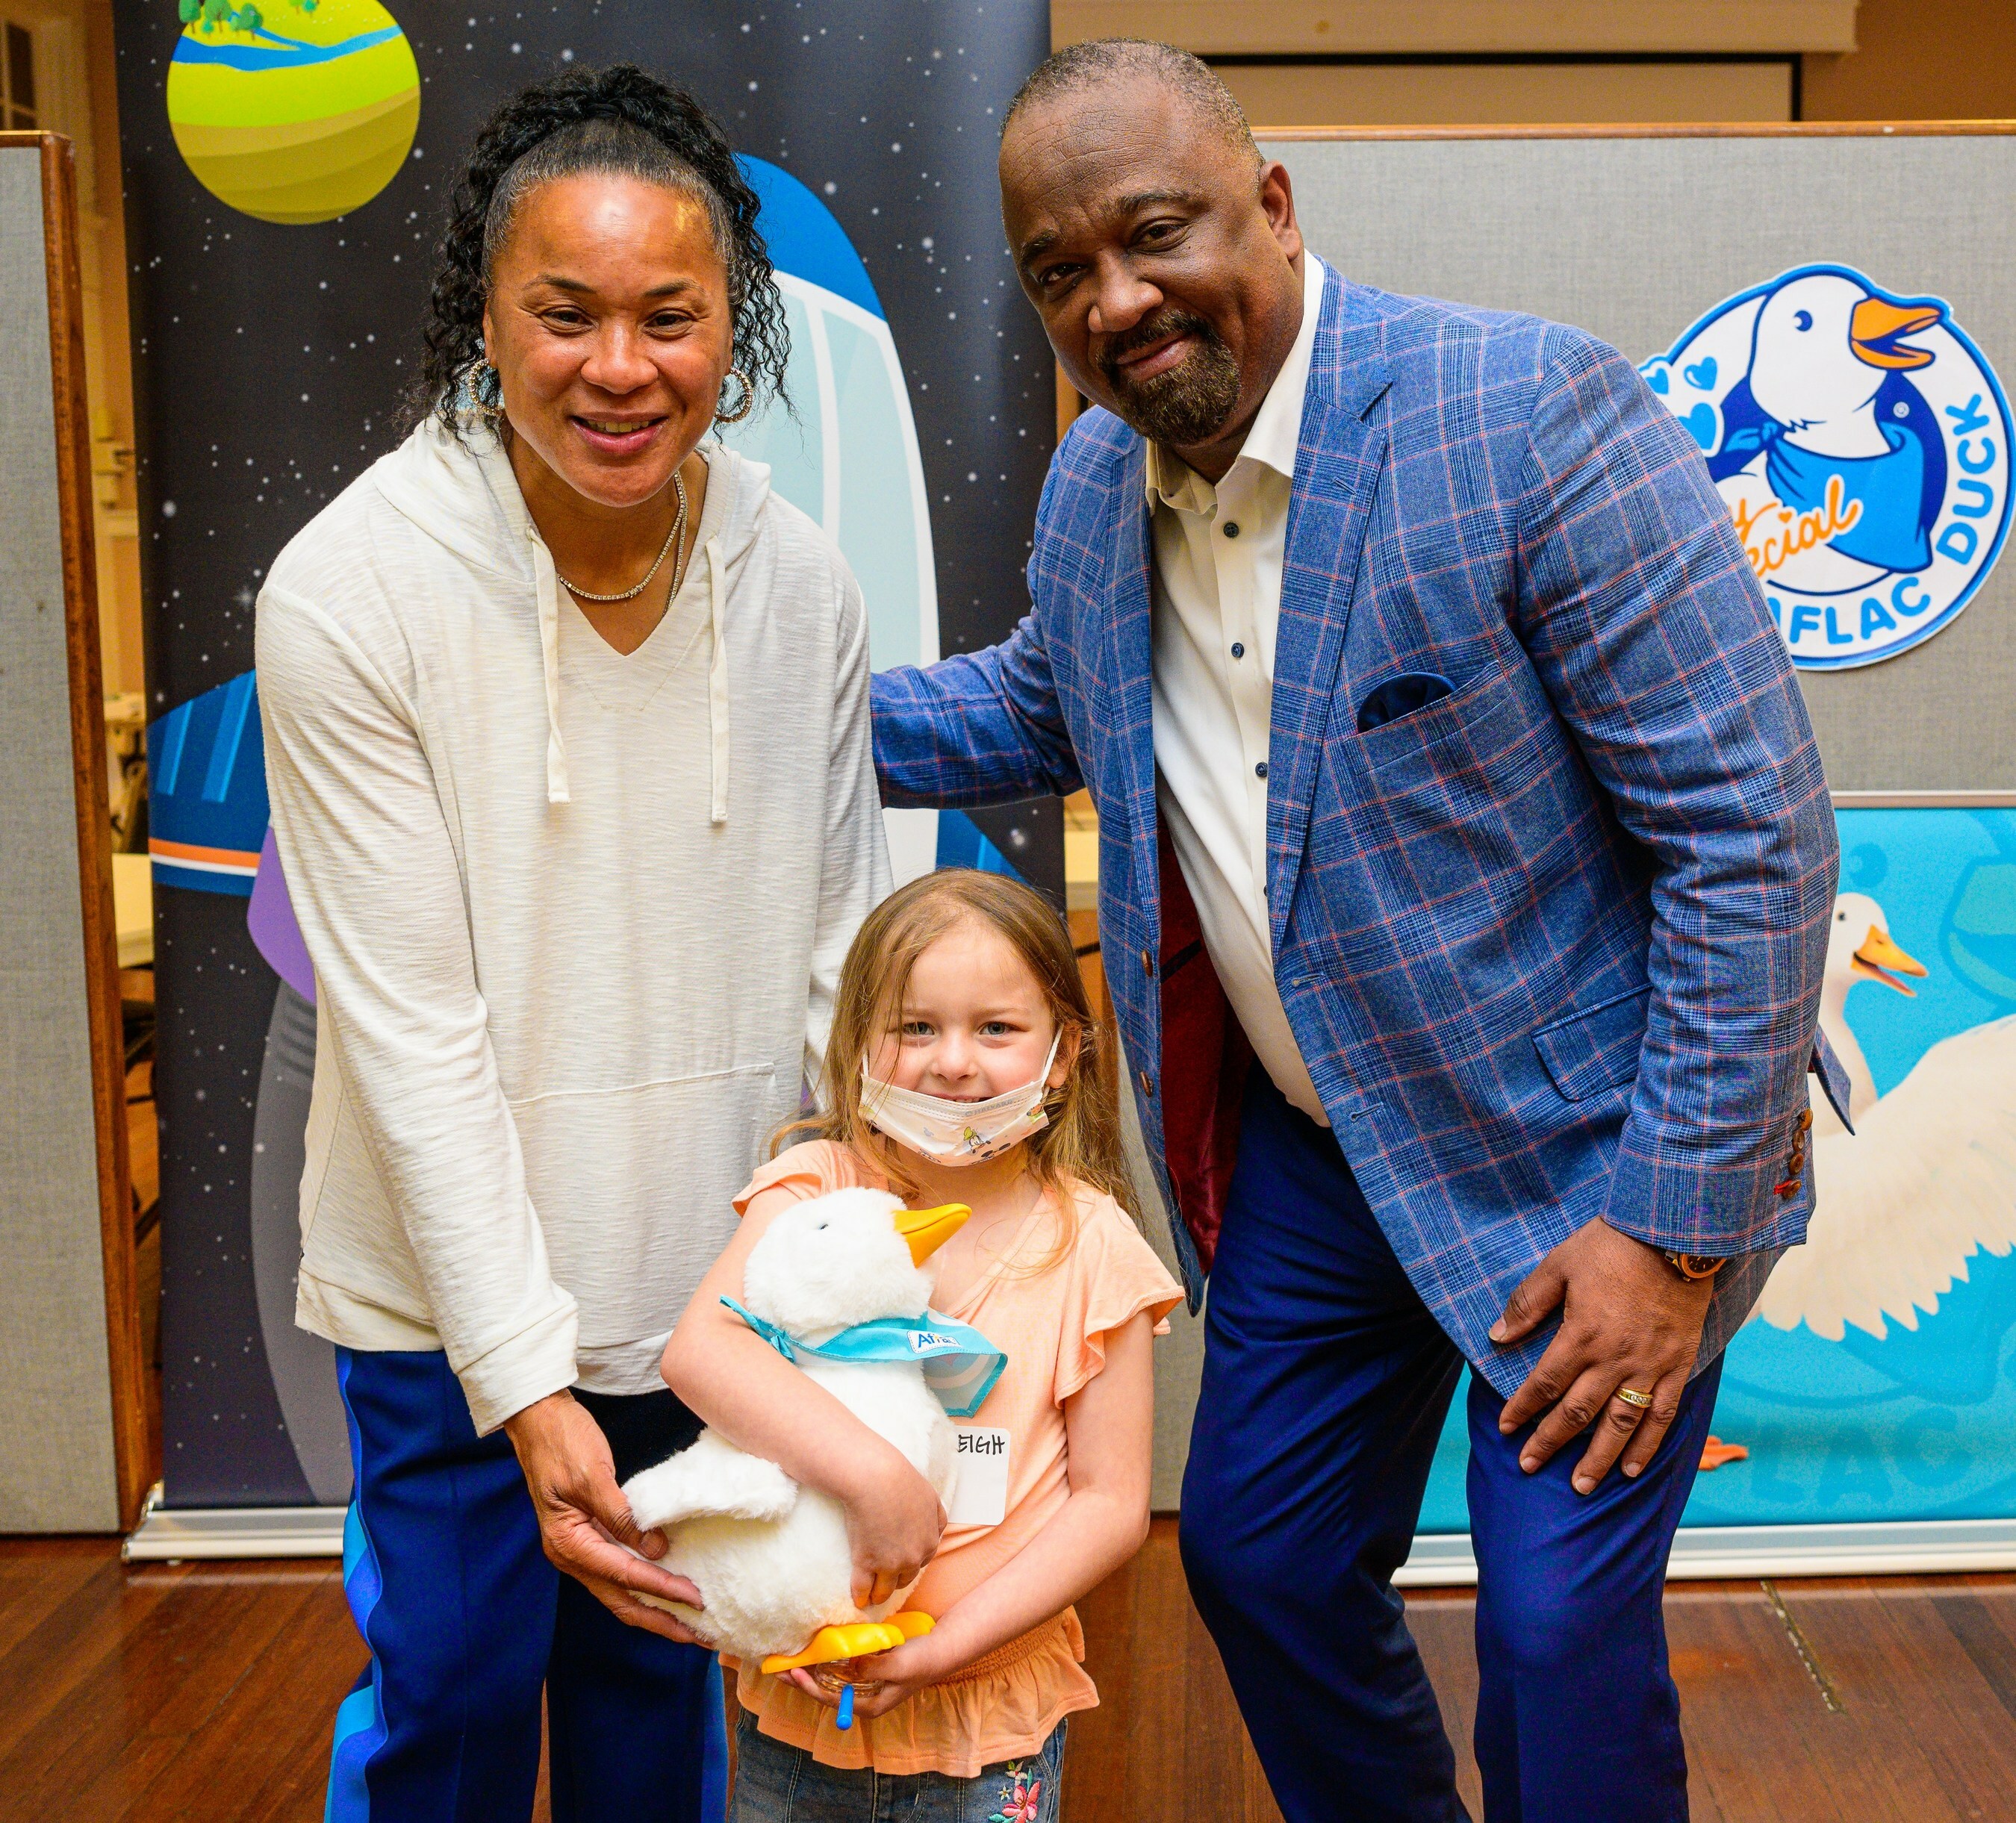 Nothing but net! Coach Dawn Staley warms children's hearts with award